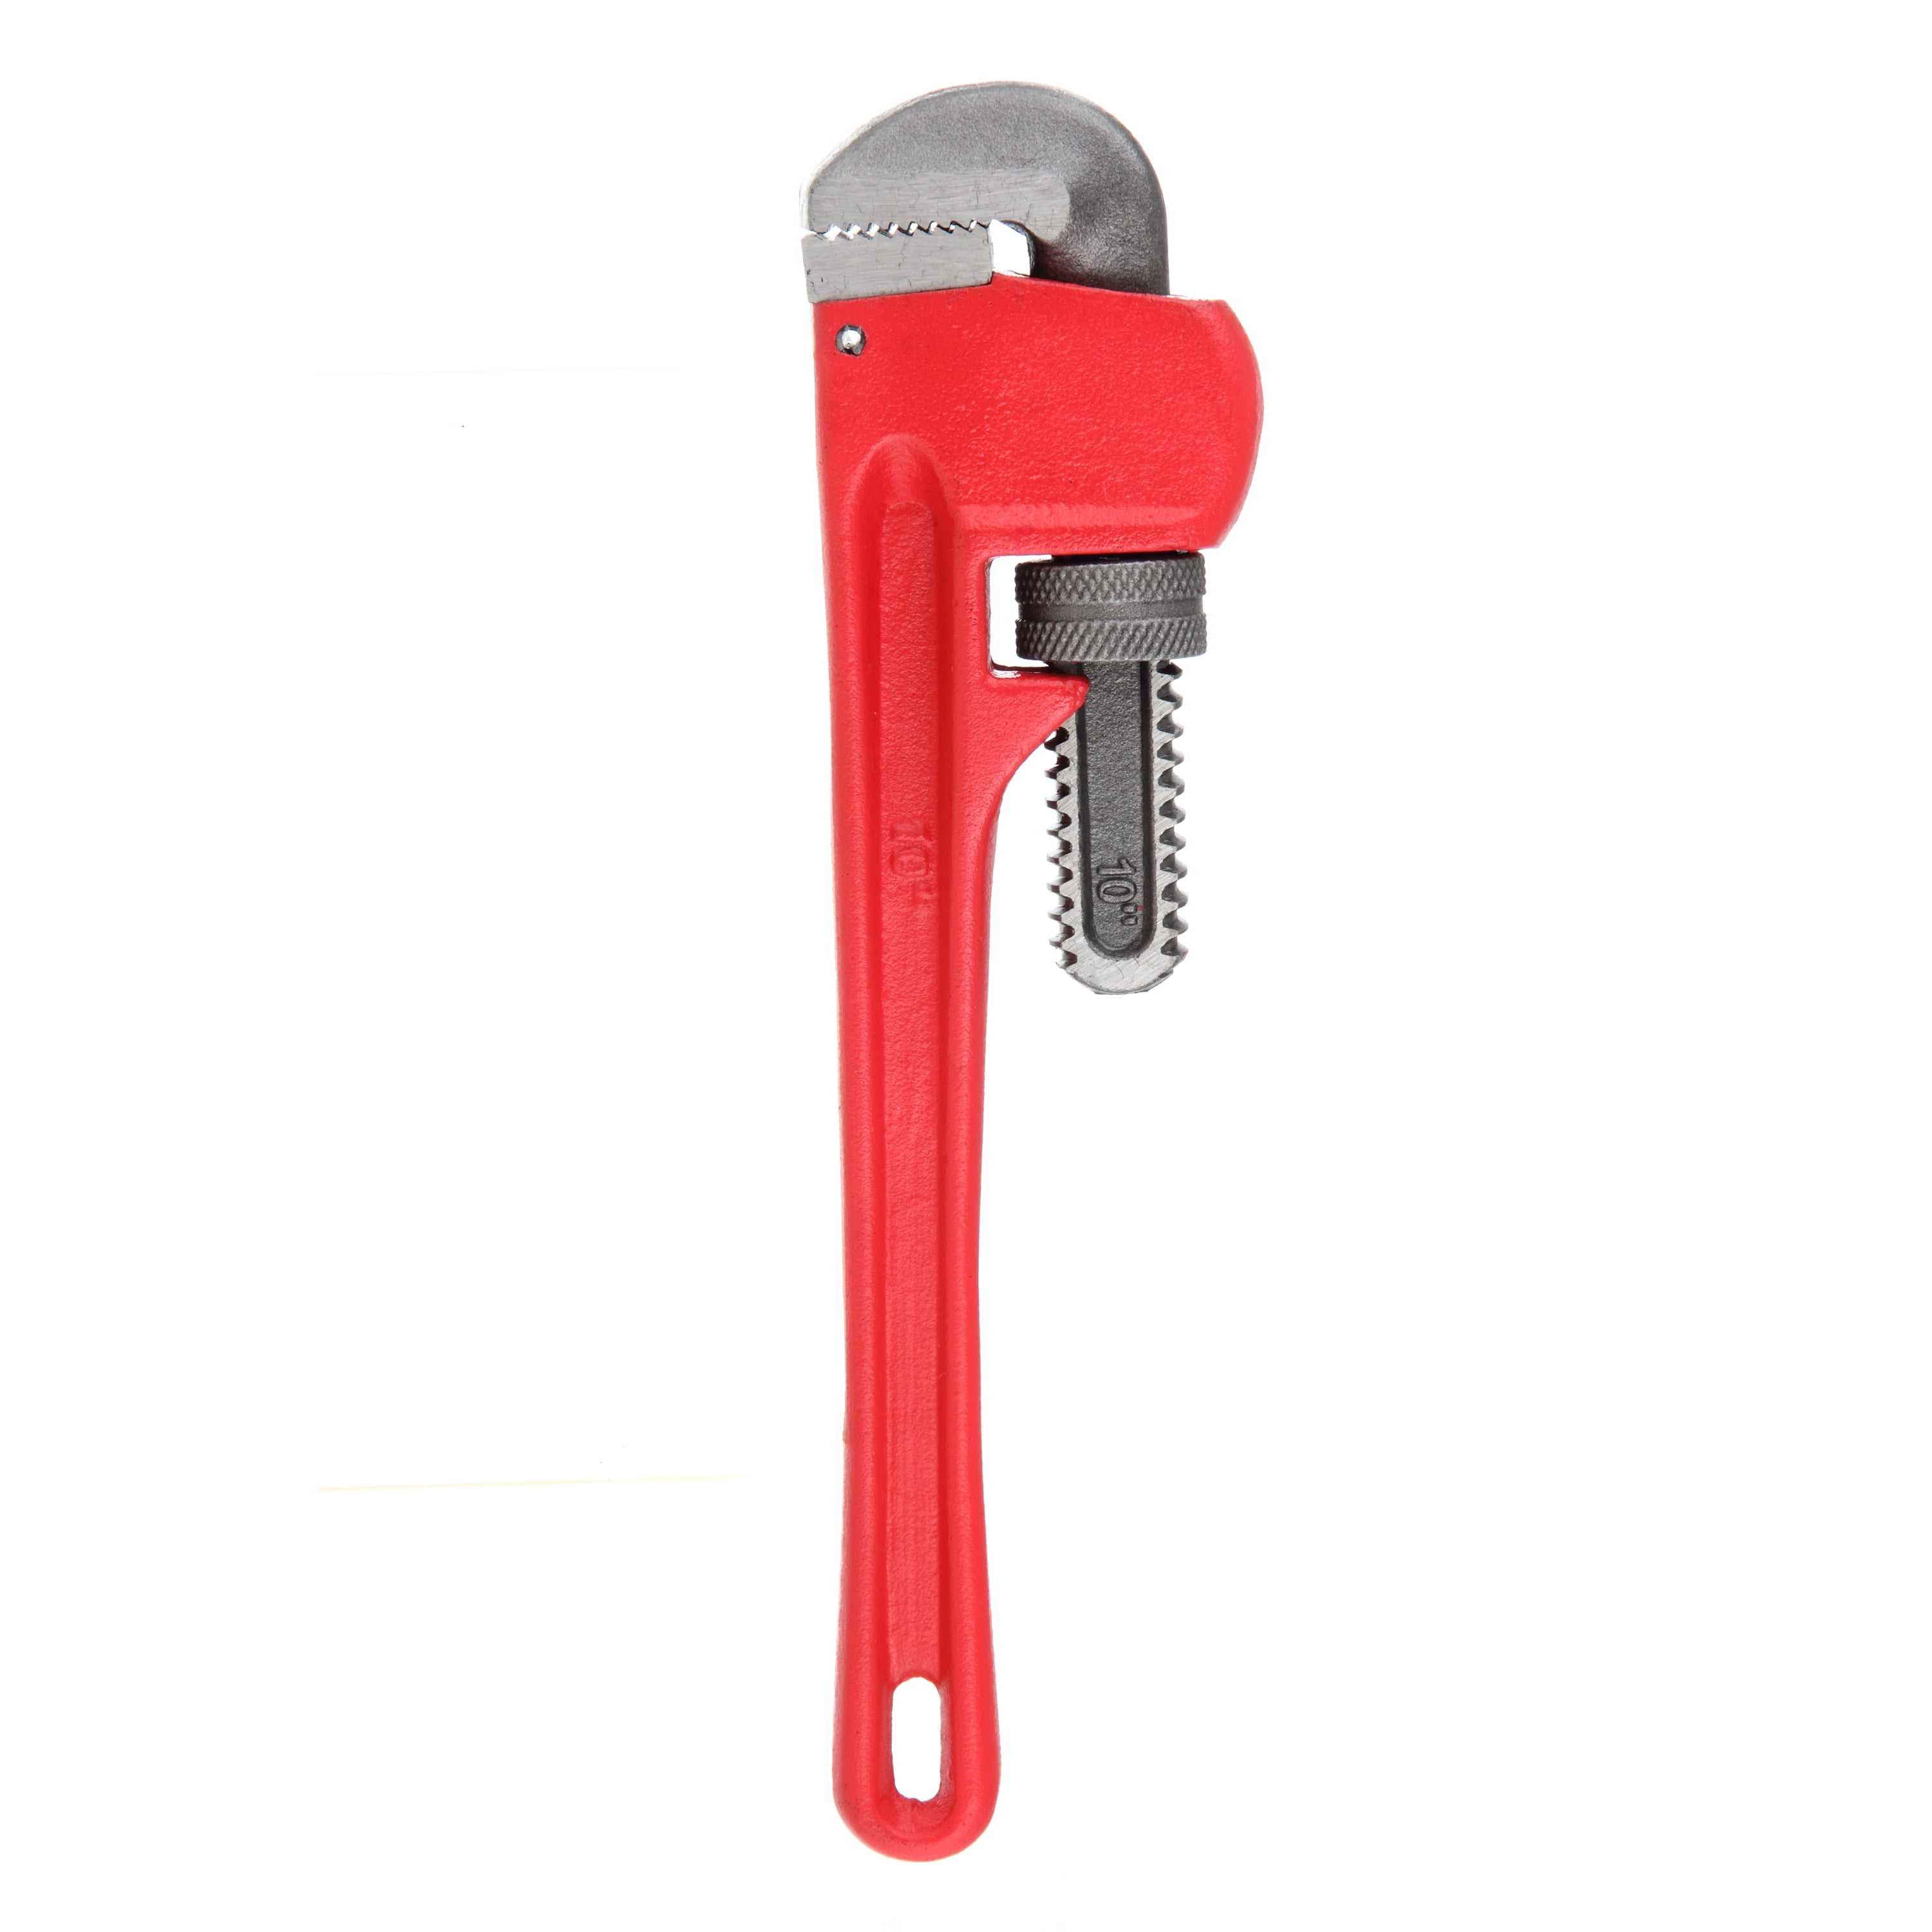 Kosma Adjustable Wrench Chrome Plated 250mm 10 Inches Adjustable Jaw Pipe Wrench 250mm Montstar KG-21772 